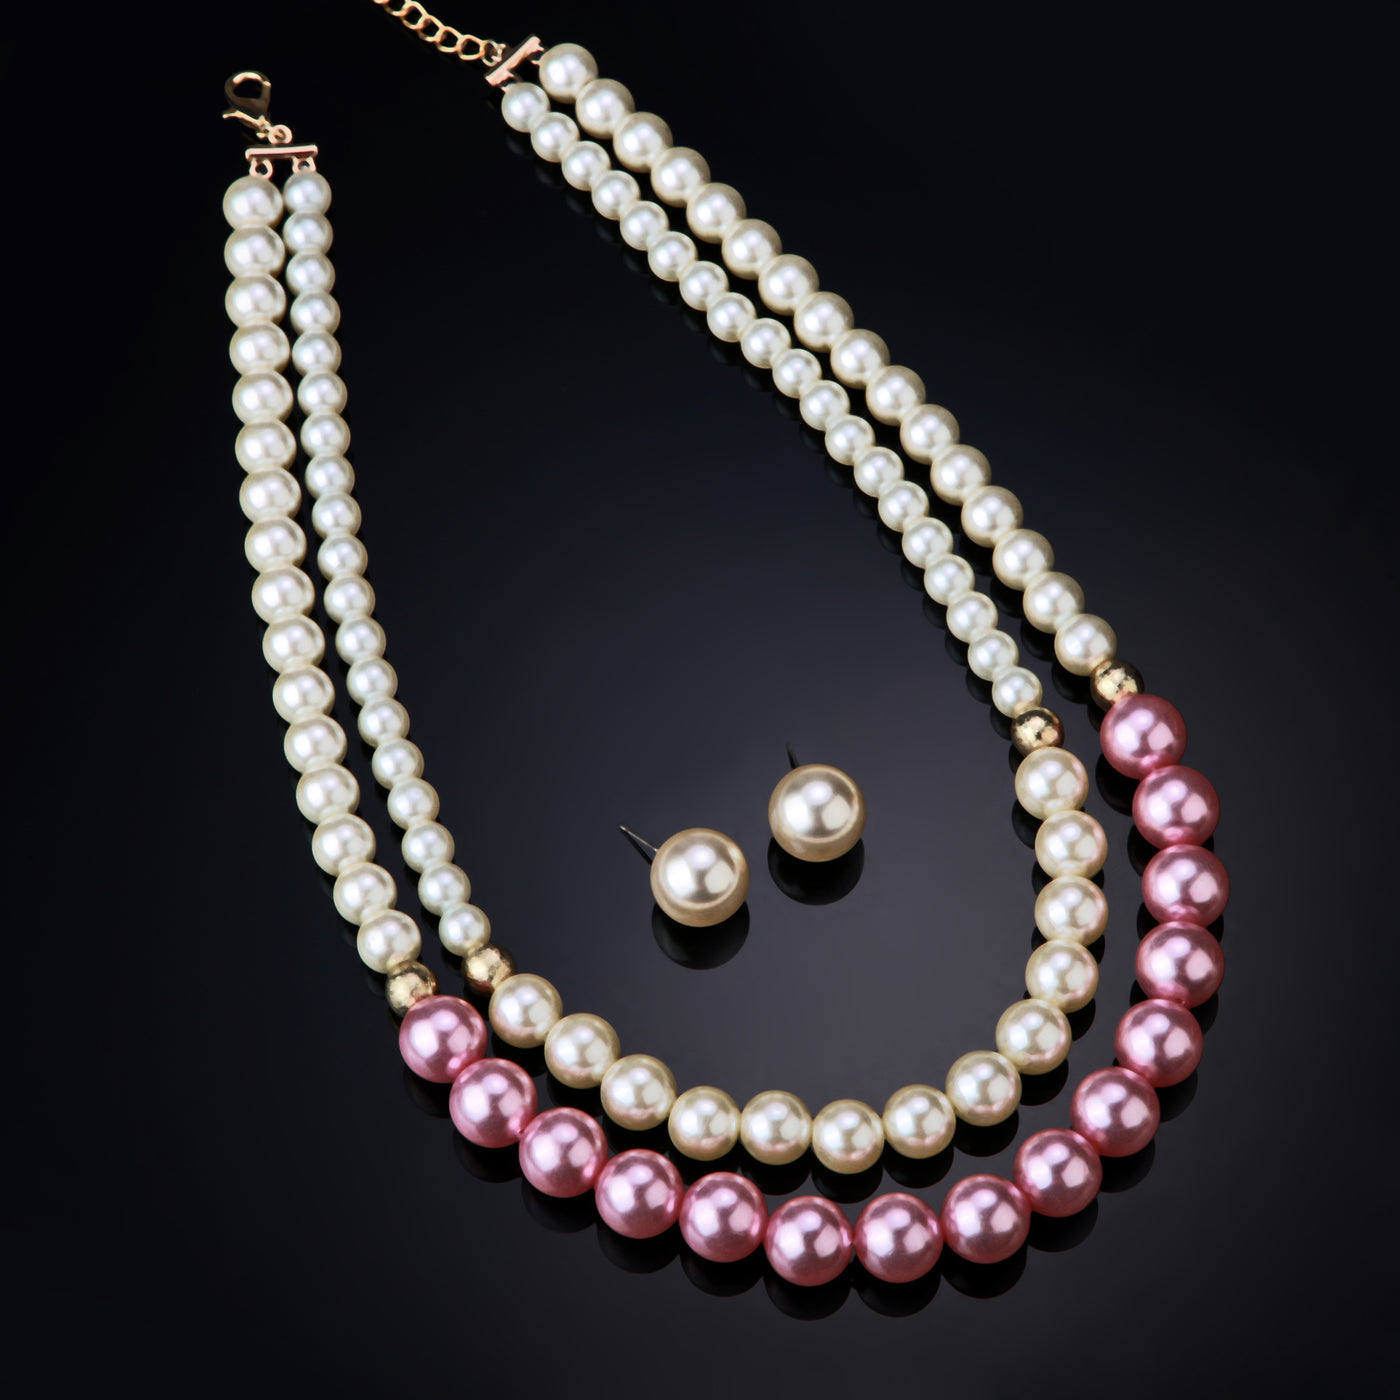 Estele Gold Plated Dazzling Double Line Pearl Necklace Set for Women